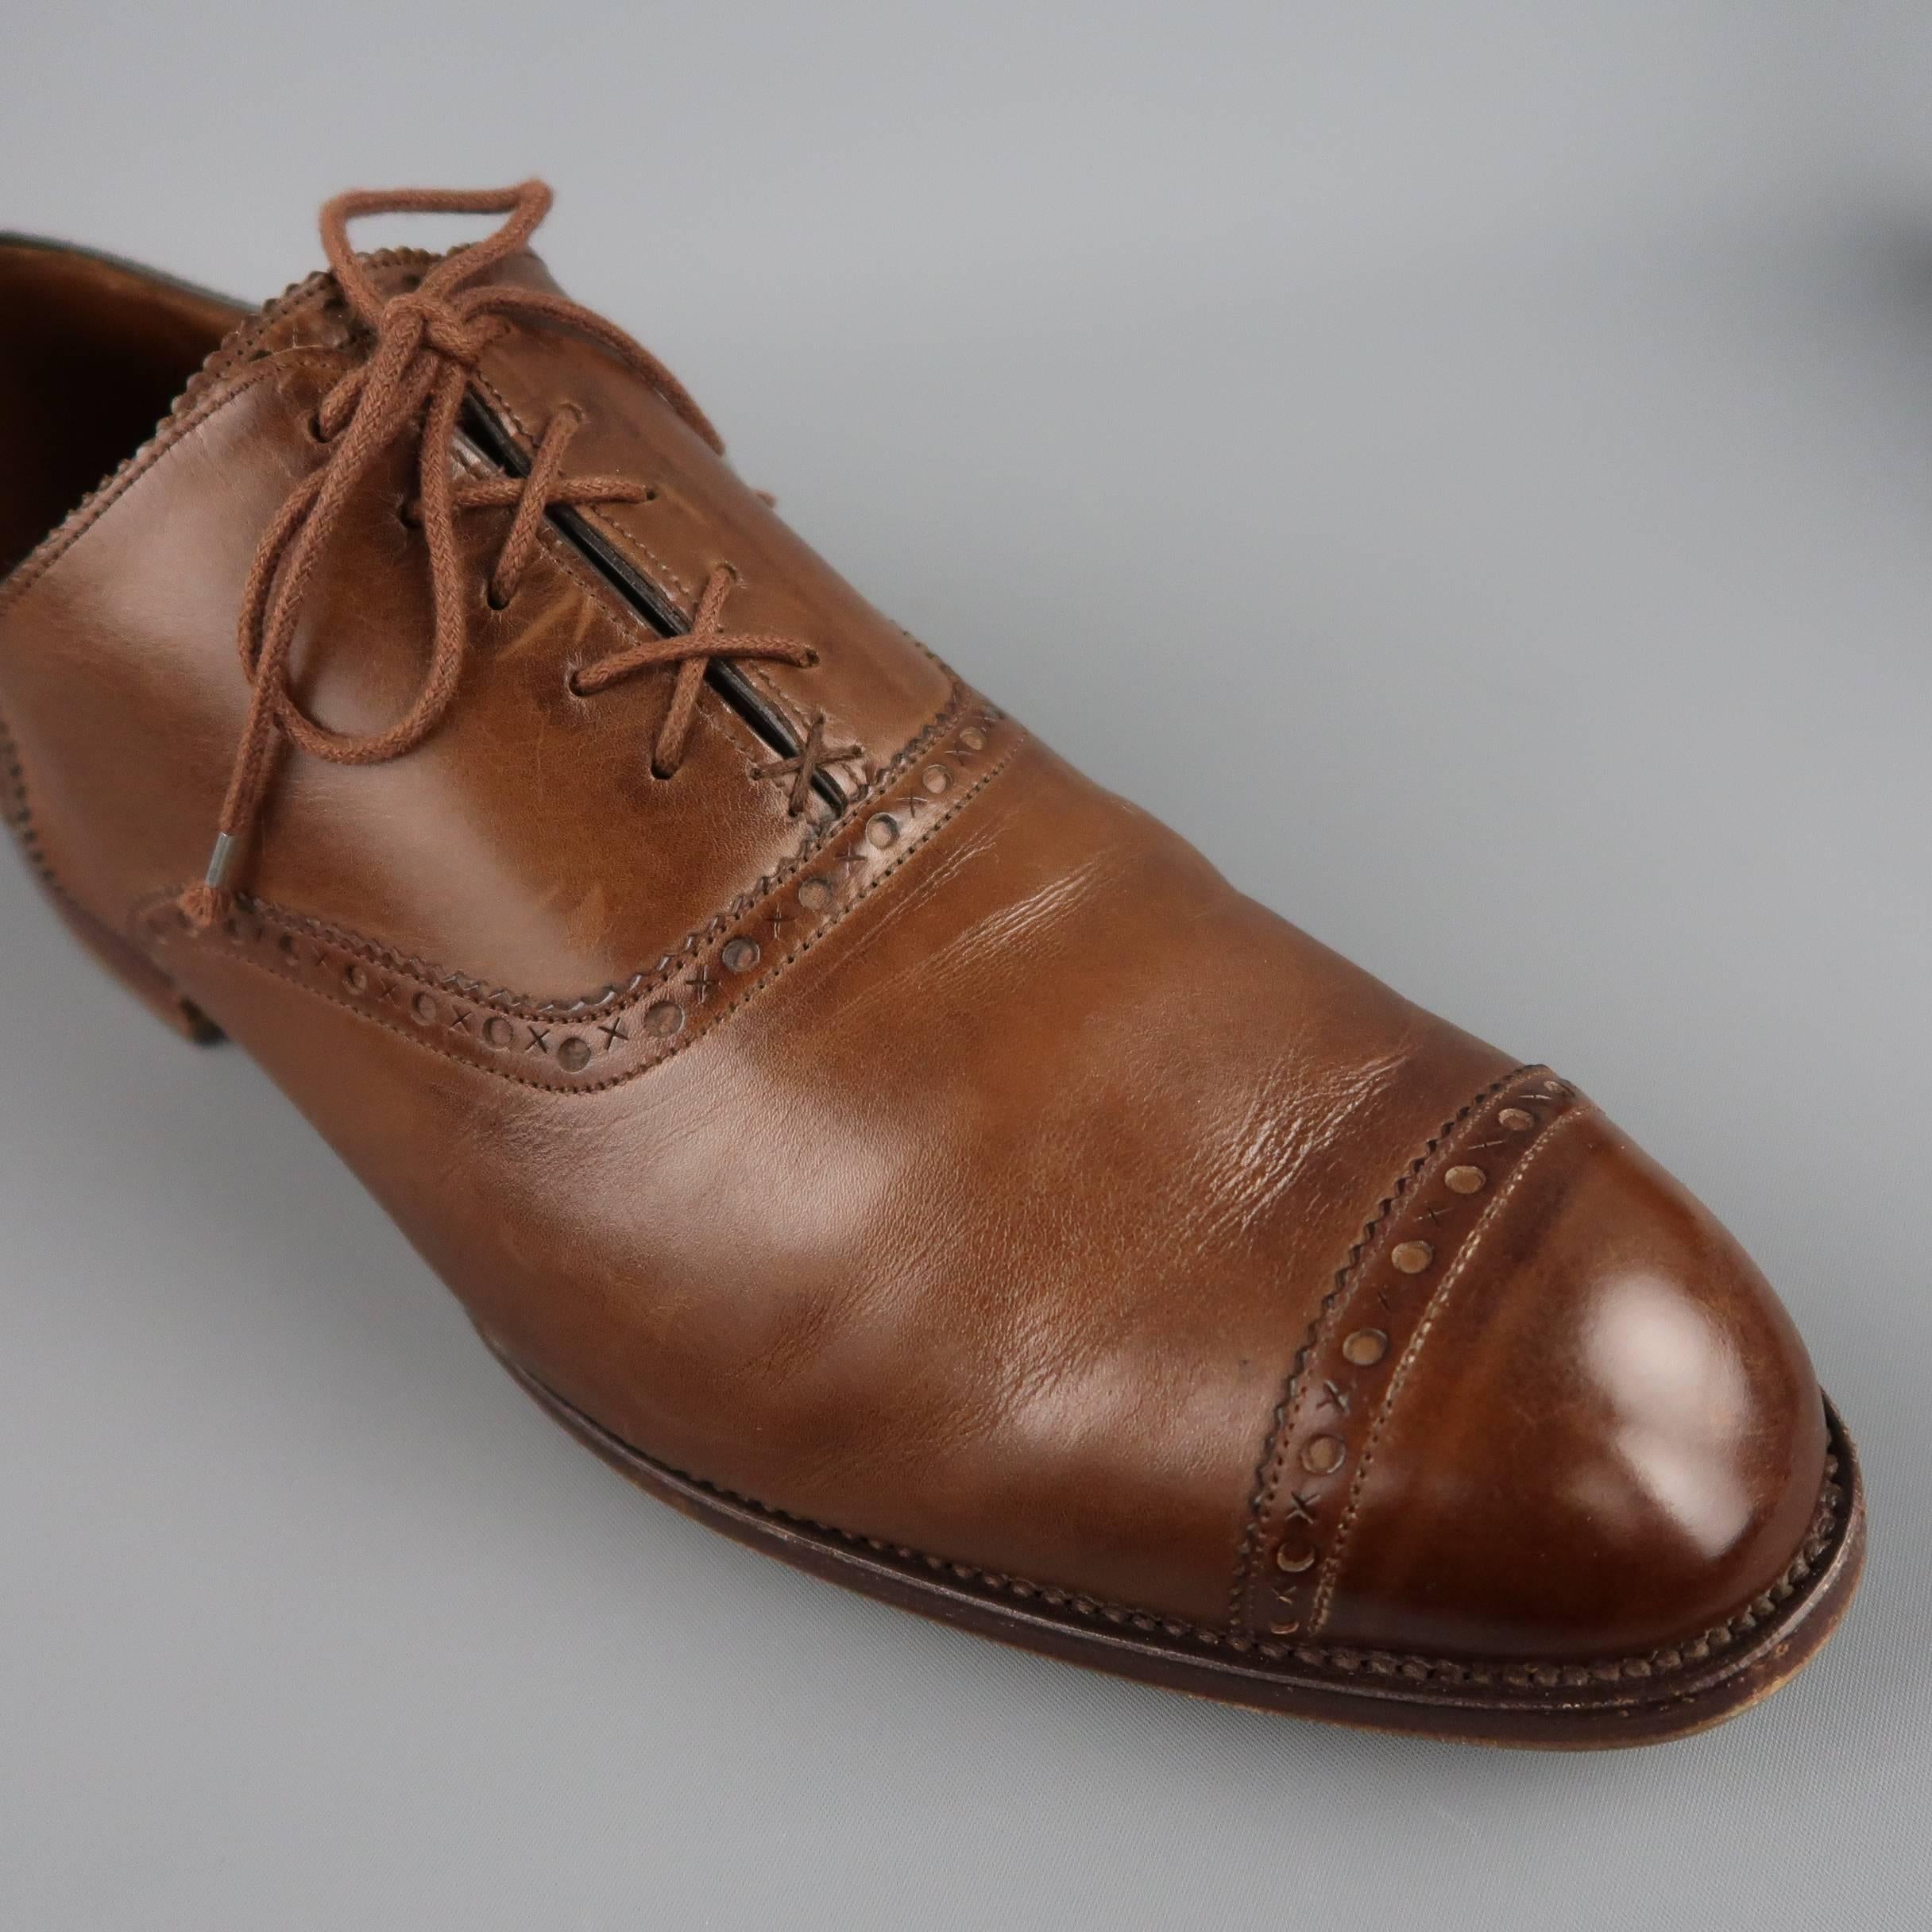 BARNER BLACK "CLIFTON" dress shoes come in a warm brown leather with a rounded point cap toe and signature X O perforated brogue piping. Resoled. With box. Made in England.
 
Good Pre-Owned Condition.
Marked:  UK 10.5
 
Outsole: 12.5 x 4